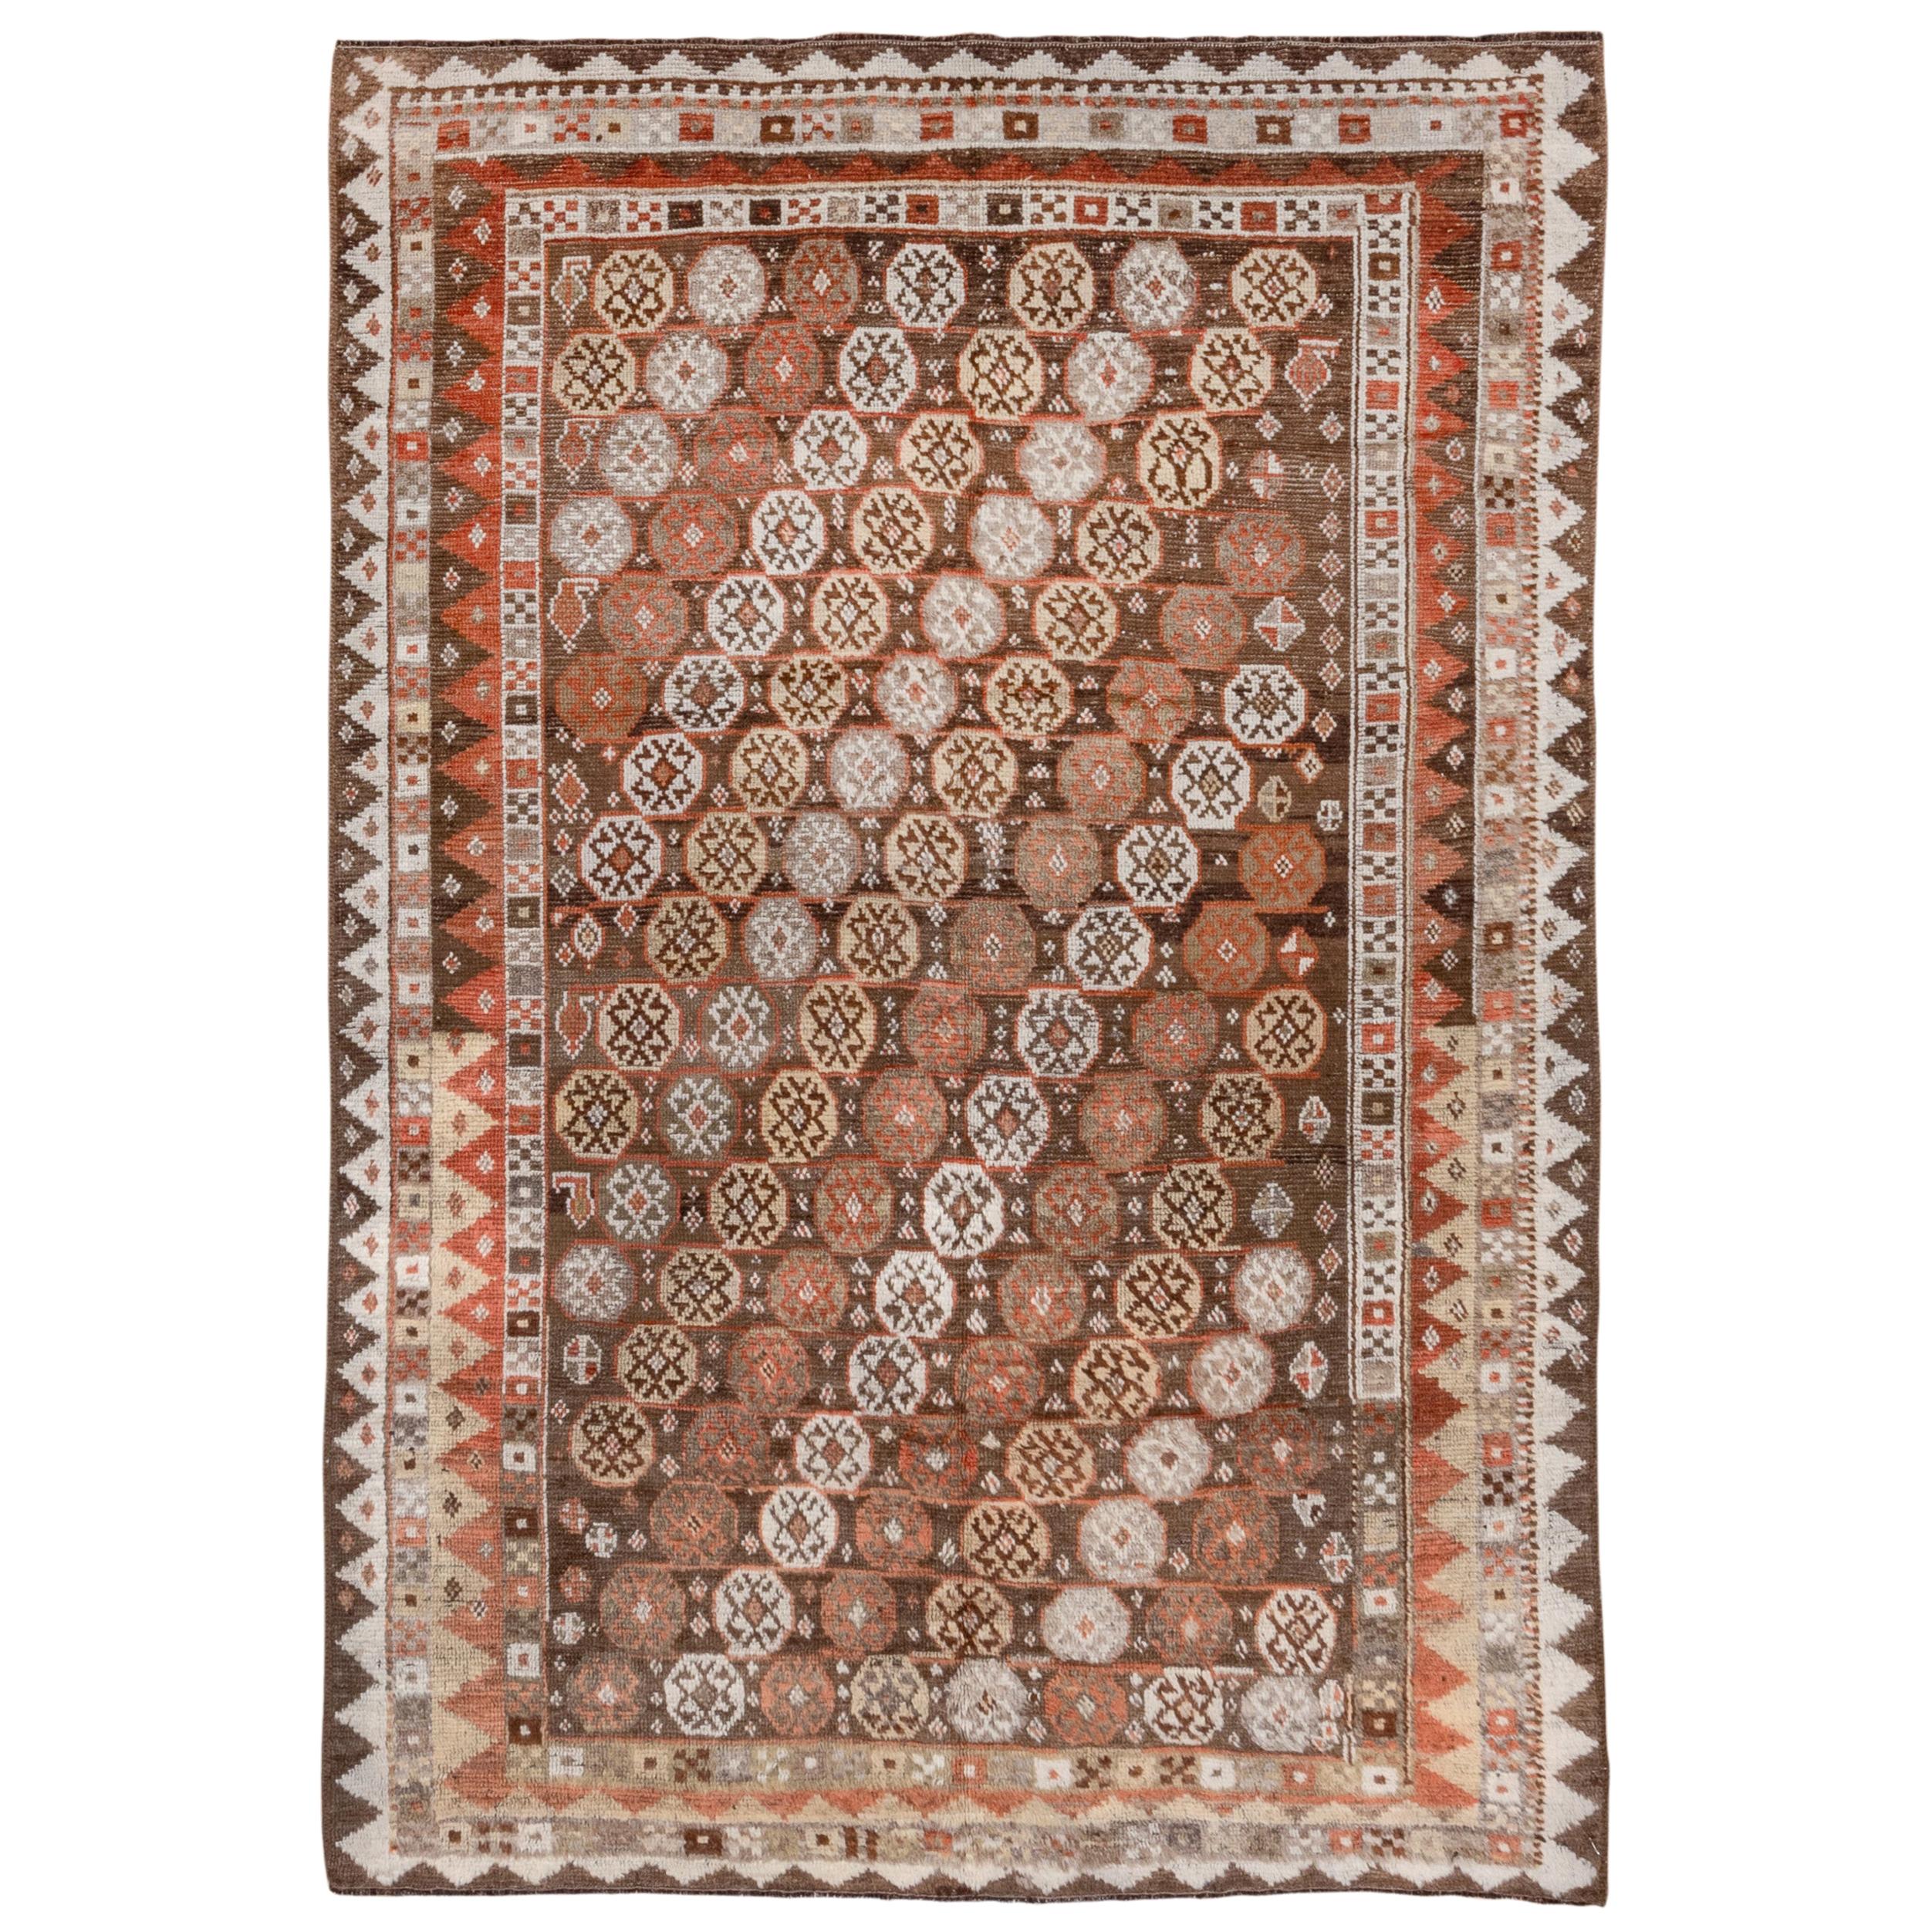 Antique Tribal Persian Gabbeh Rug, Rust Brown and White Tones, Southwest Decor For Sale